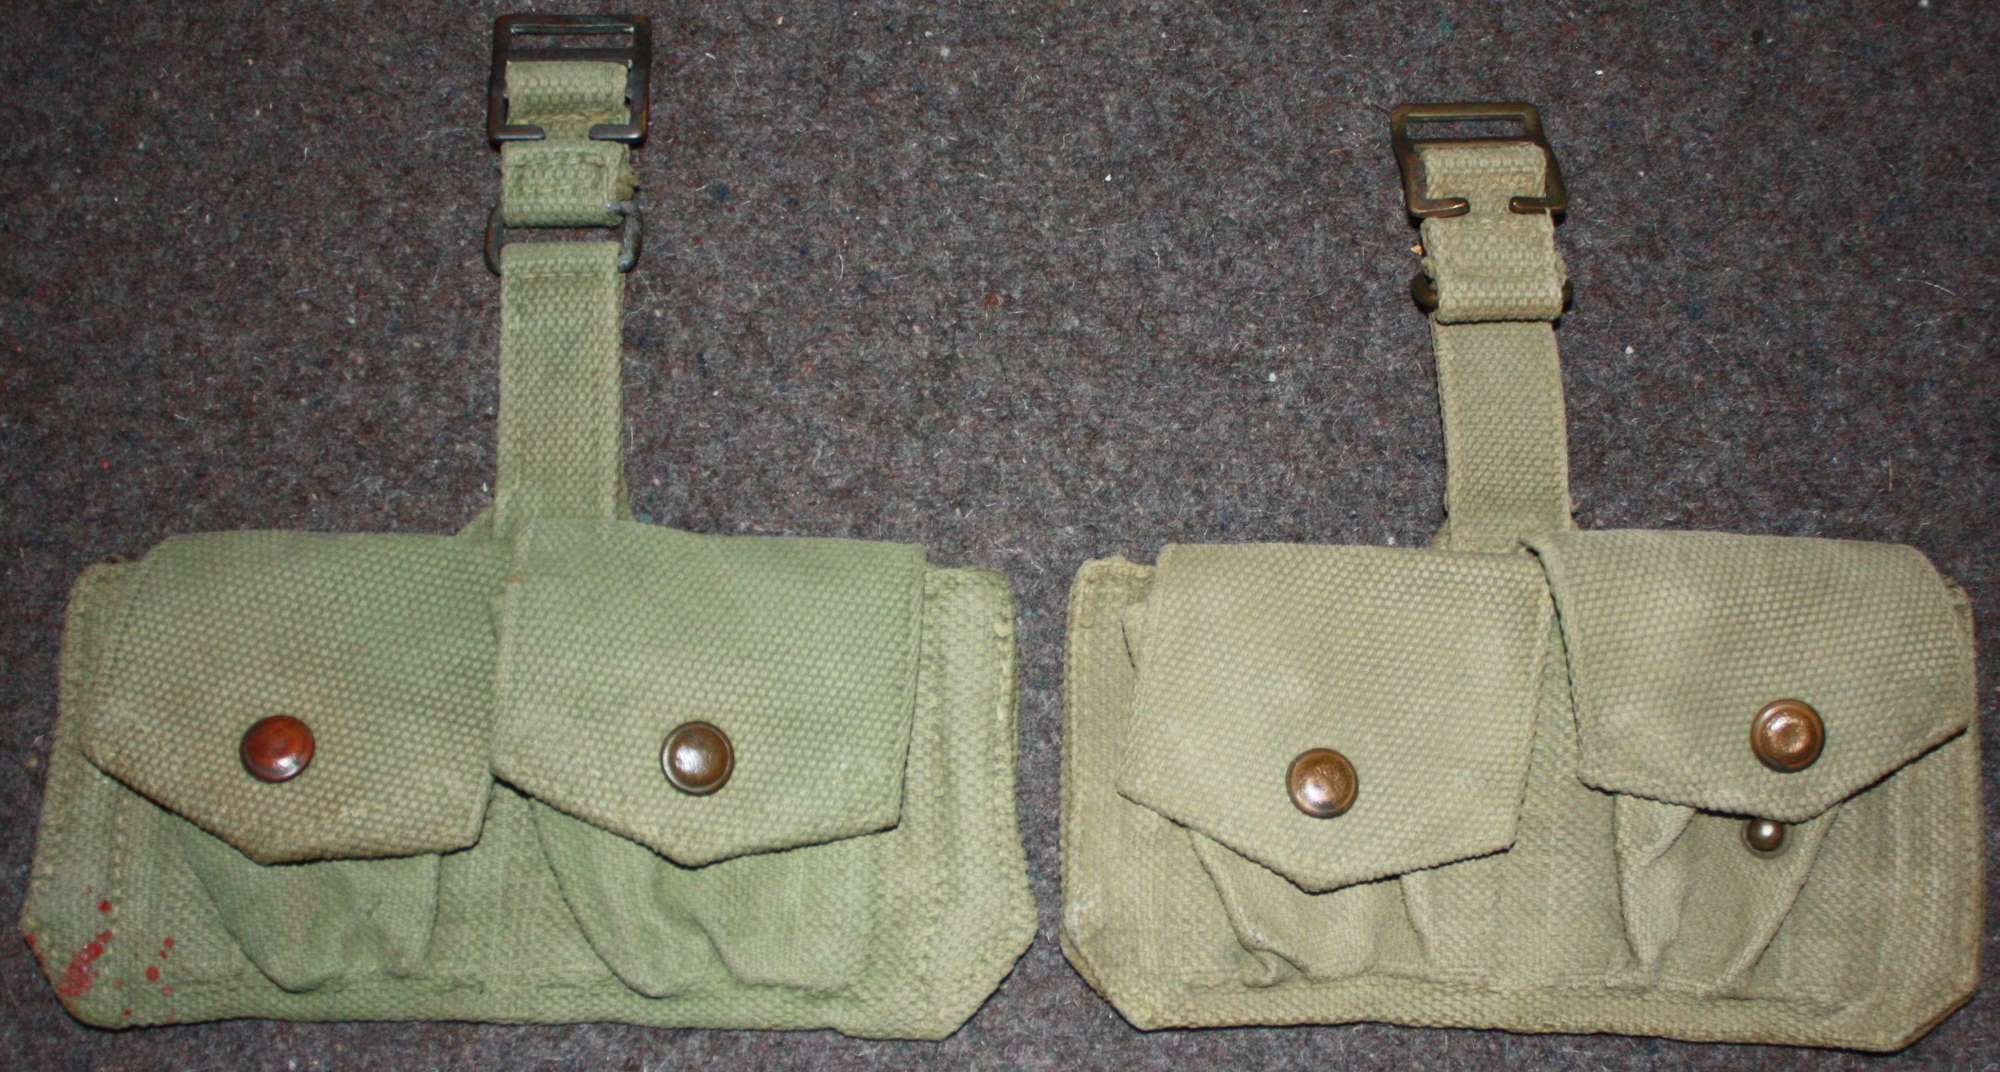 A GOOD MATCHING PAIR OF THE SMALL DOUBLE AMMO POUCHES